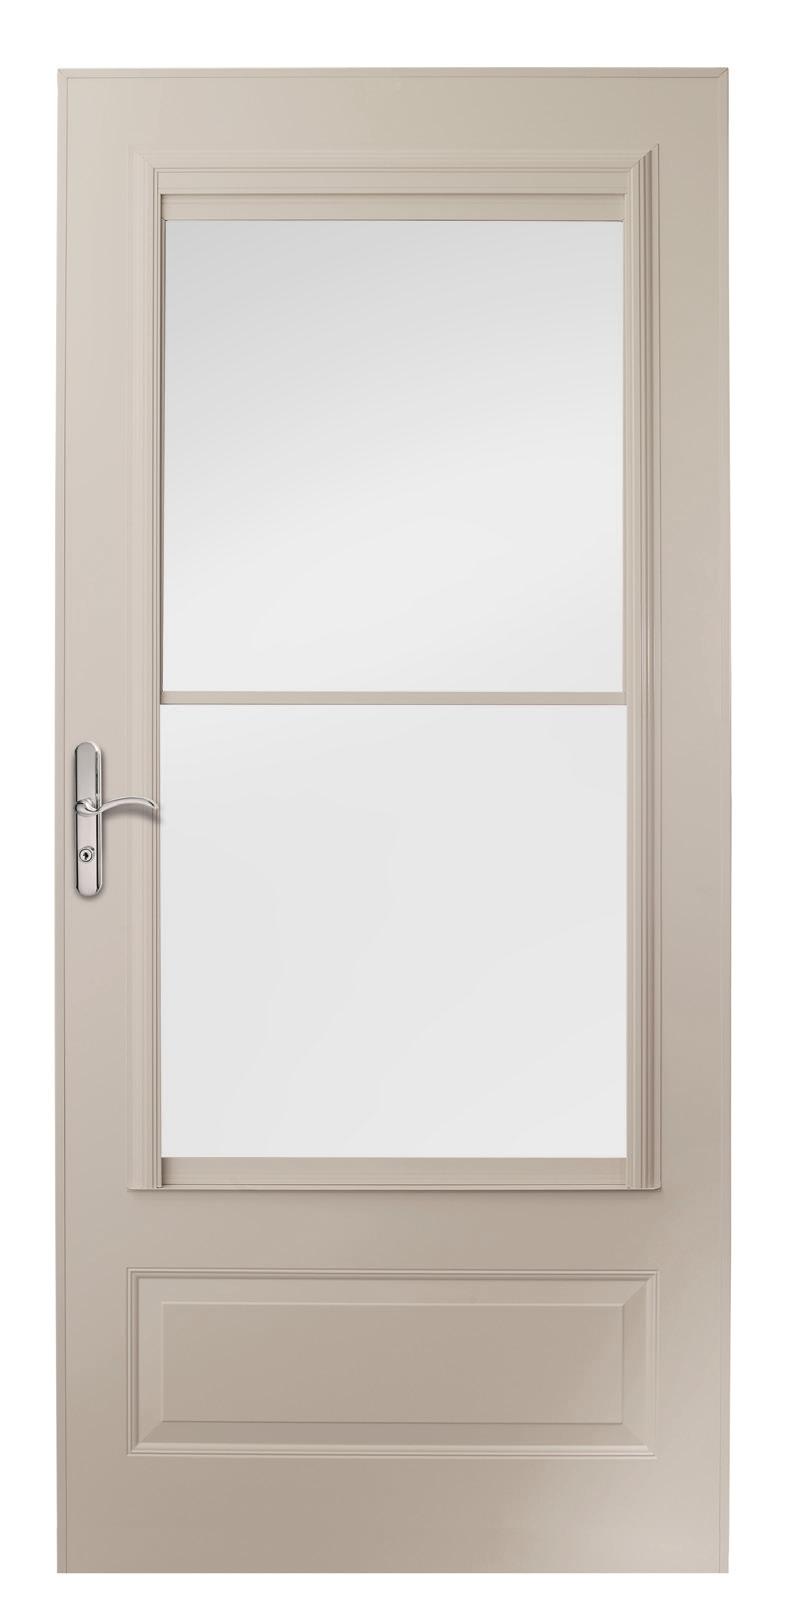 ANDERSEN ¾ Light Panel Ventilating Srm Doors 10 Series ¾ Light Panel Ventilating Moisture-resistant wood core with easy-clean low-maintenance aluminum exterior for added strength and durability